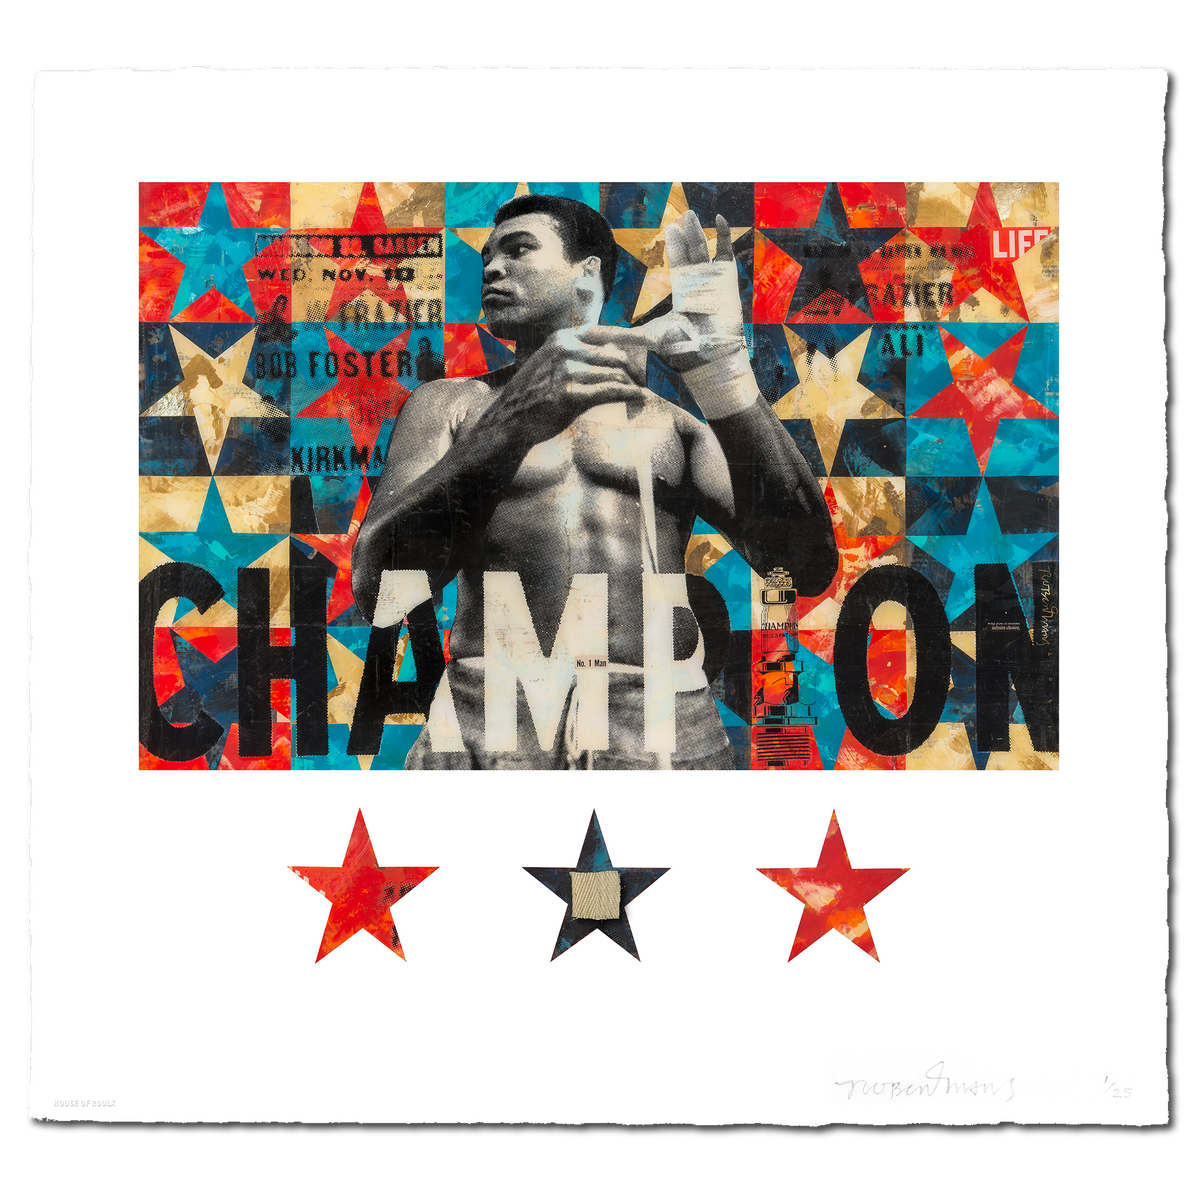 Robert Mars &quot;Ascension&quot; - Archival Print with Authentic Muhammad Ali Swatch, Edition of 25 - 22 x 24&quot;